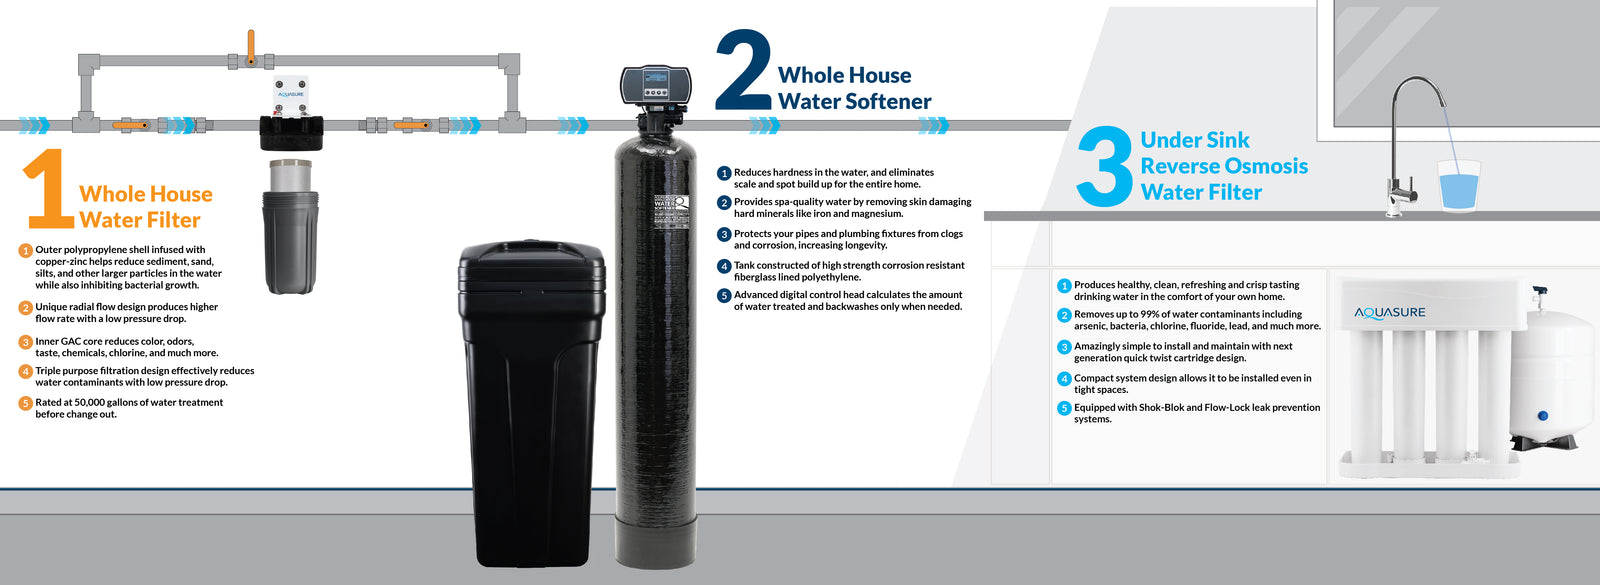 Aquasure 1004804745 Whole House Filtration with 64,000 Grain Water Softener, Reverse Osmosis System and Sediment-GAC Pre-Filter